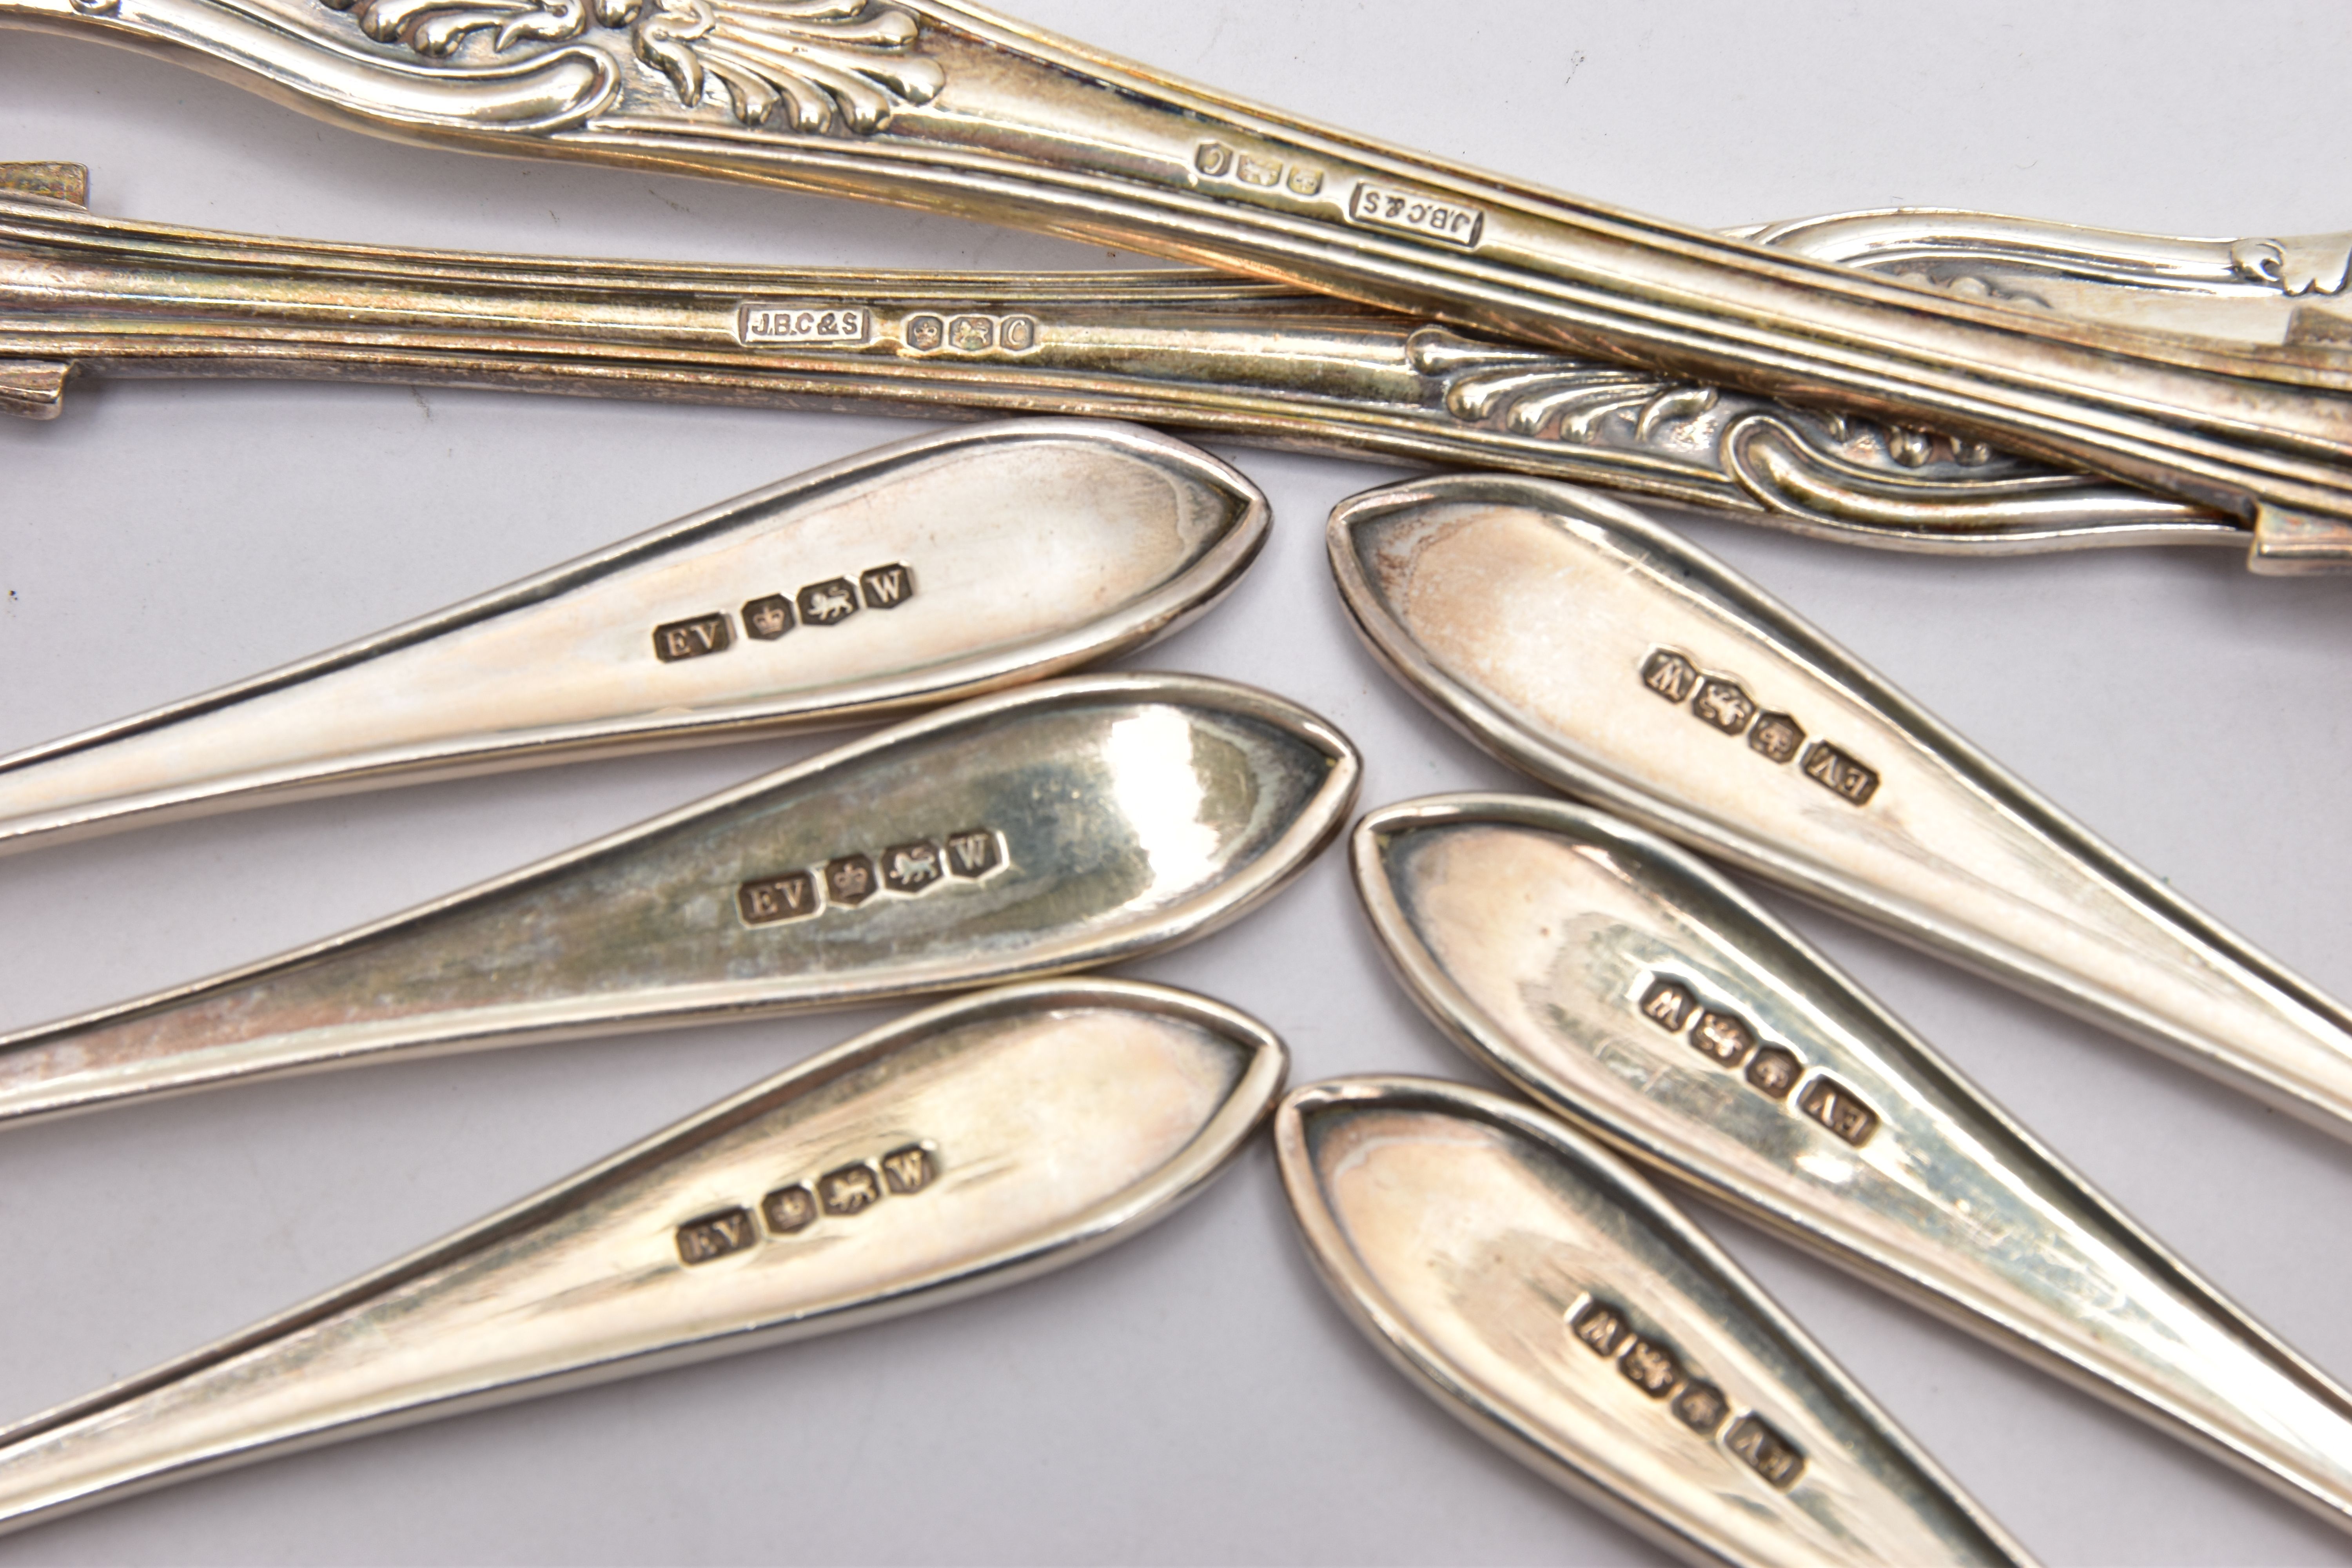 A PAIR OF ELIZABETH II SILVER KINGS PATTERN SERVING SPOONS OF OVERSIZED SOUP SPOON FORM, makers J - Image 4 of 4